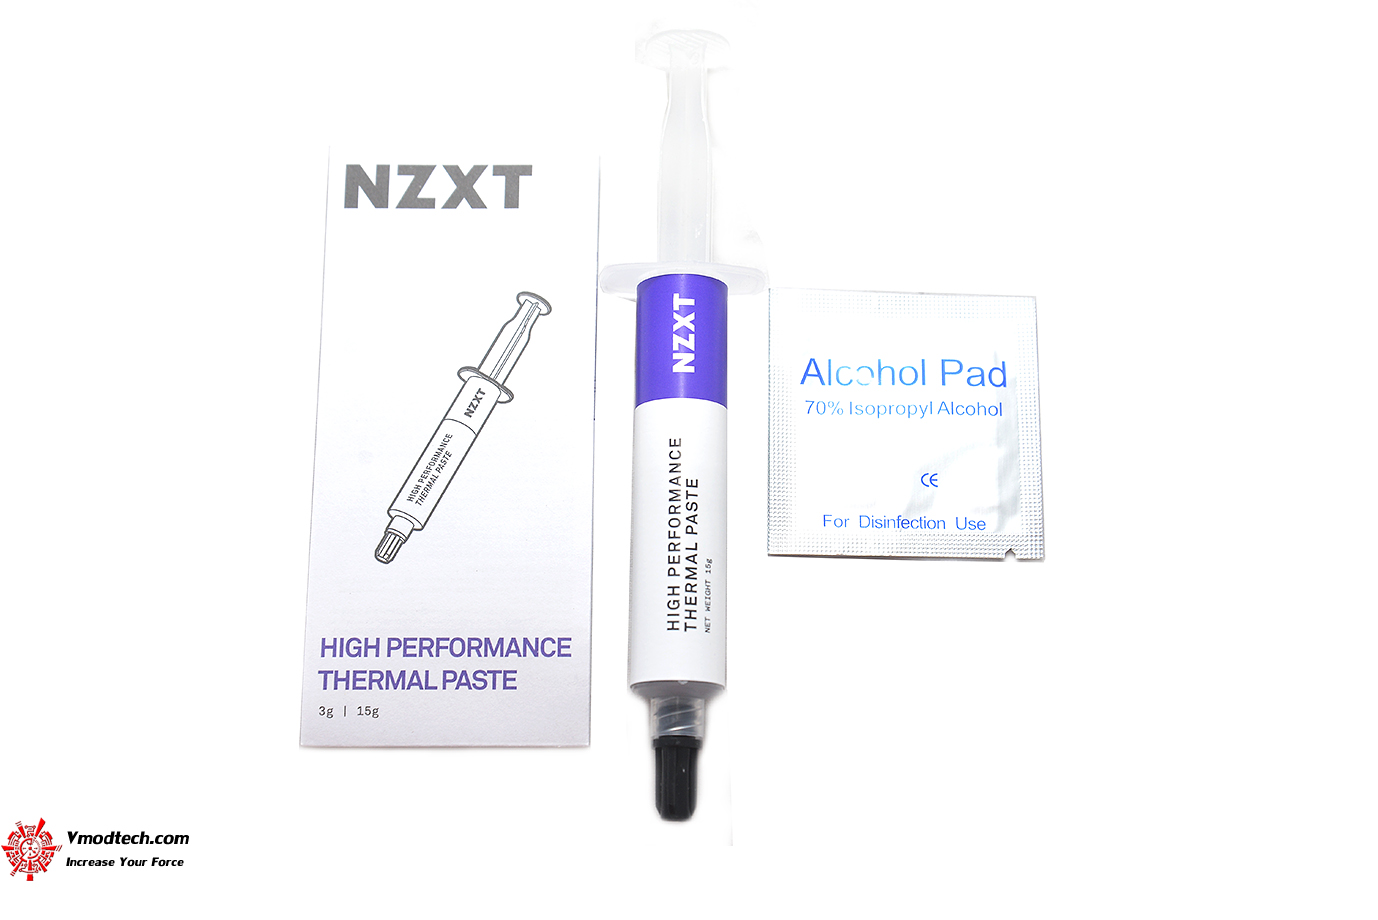 dsc 1455 NZXT High performance Thermal Paste (15g) Review